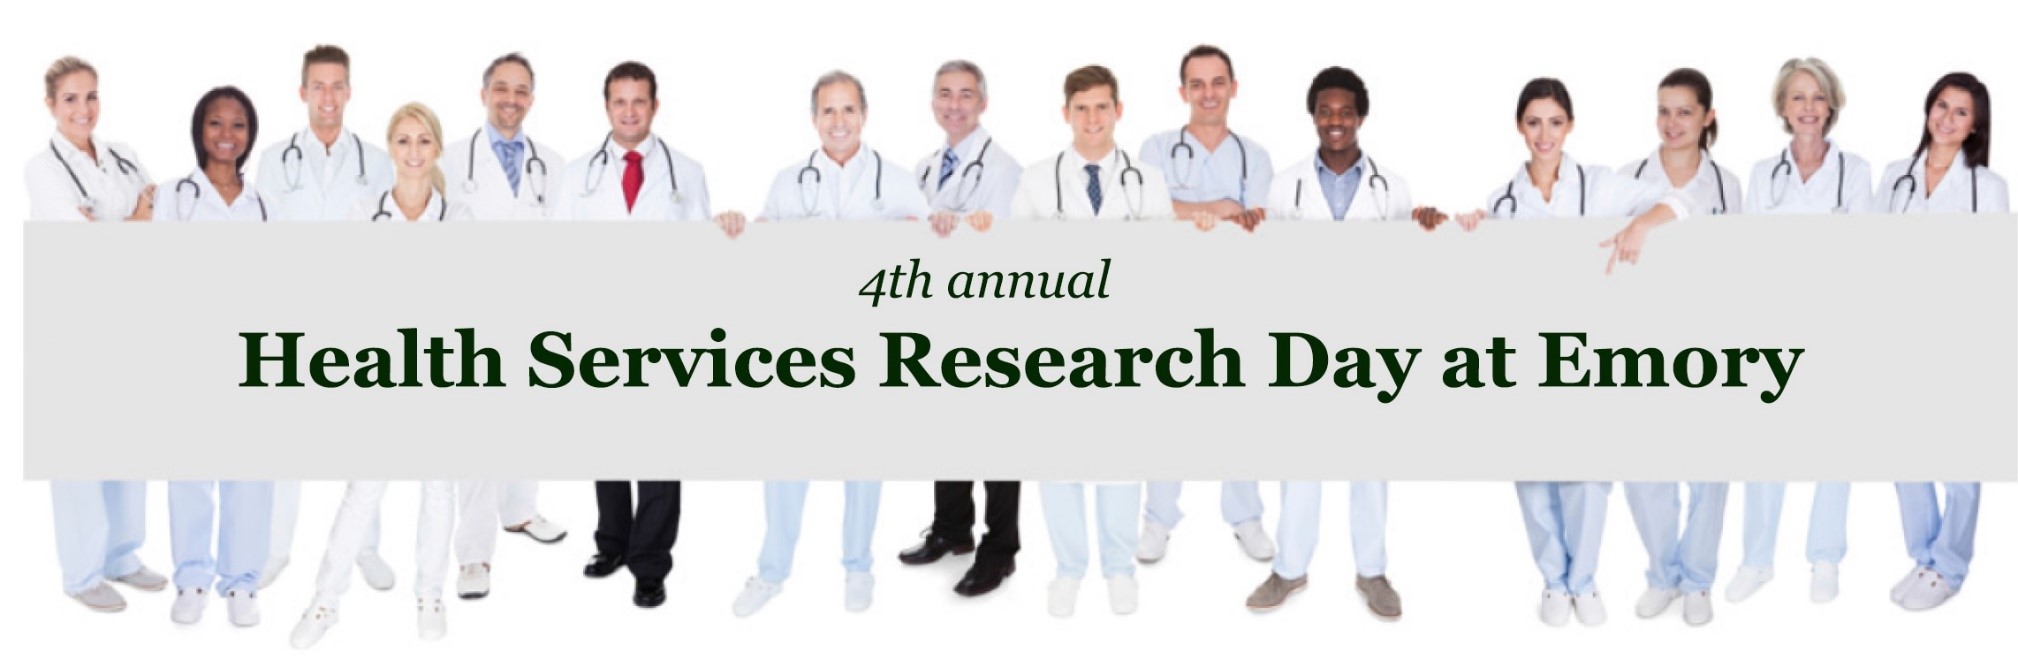 Health Sciences Research Day Logo